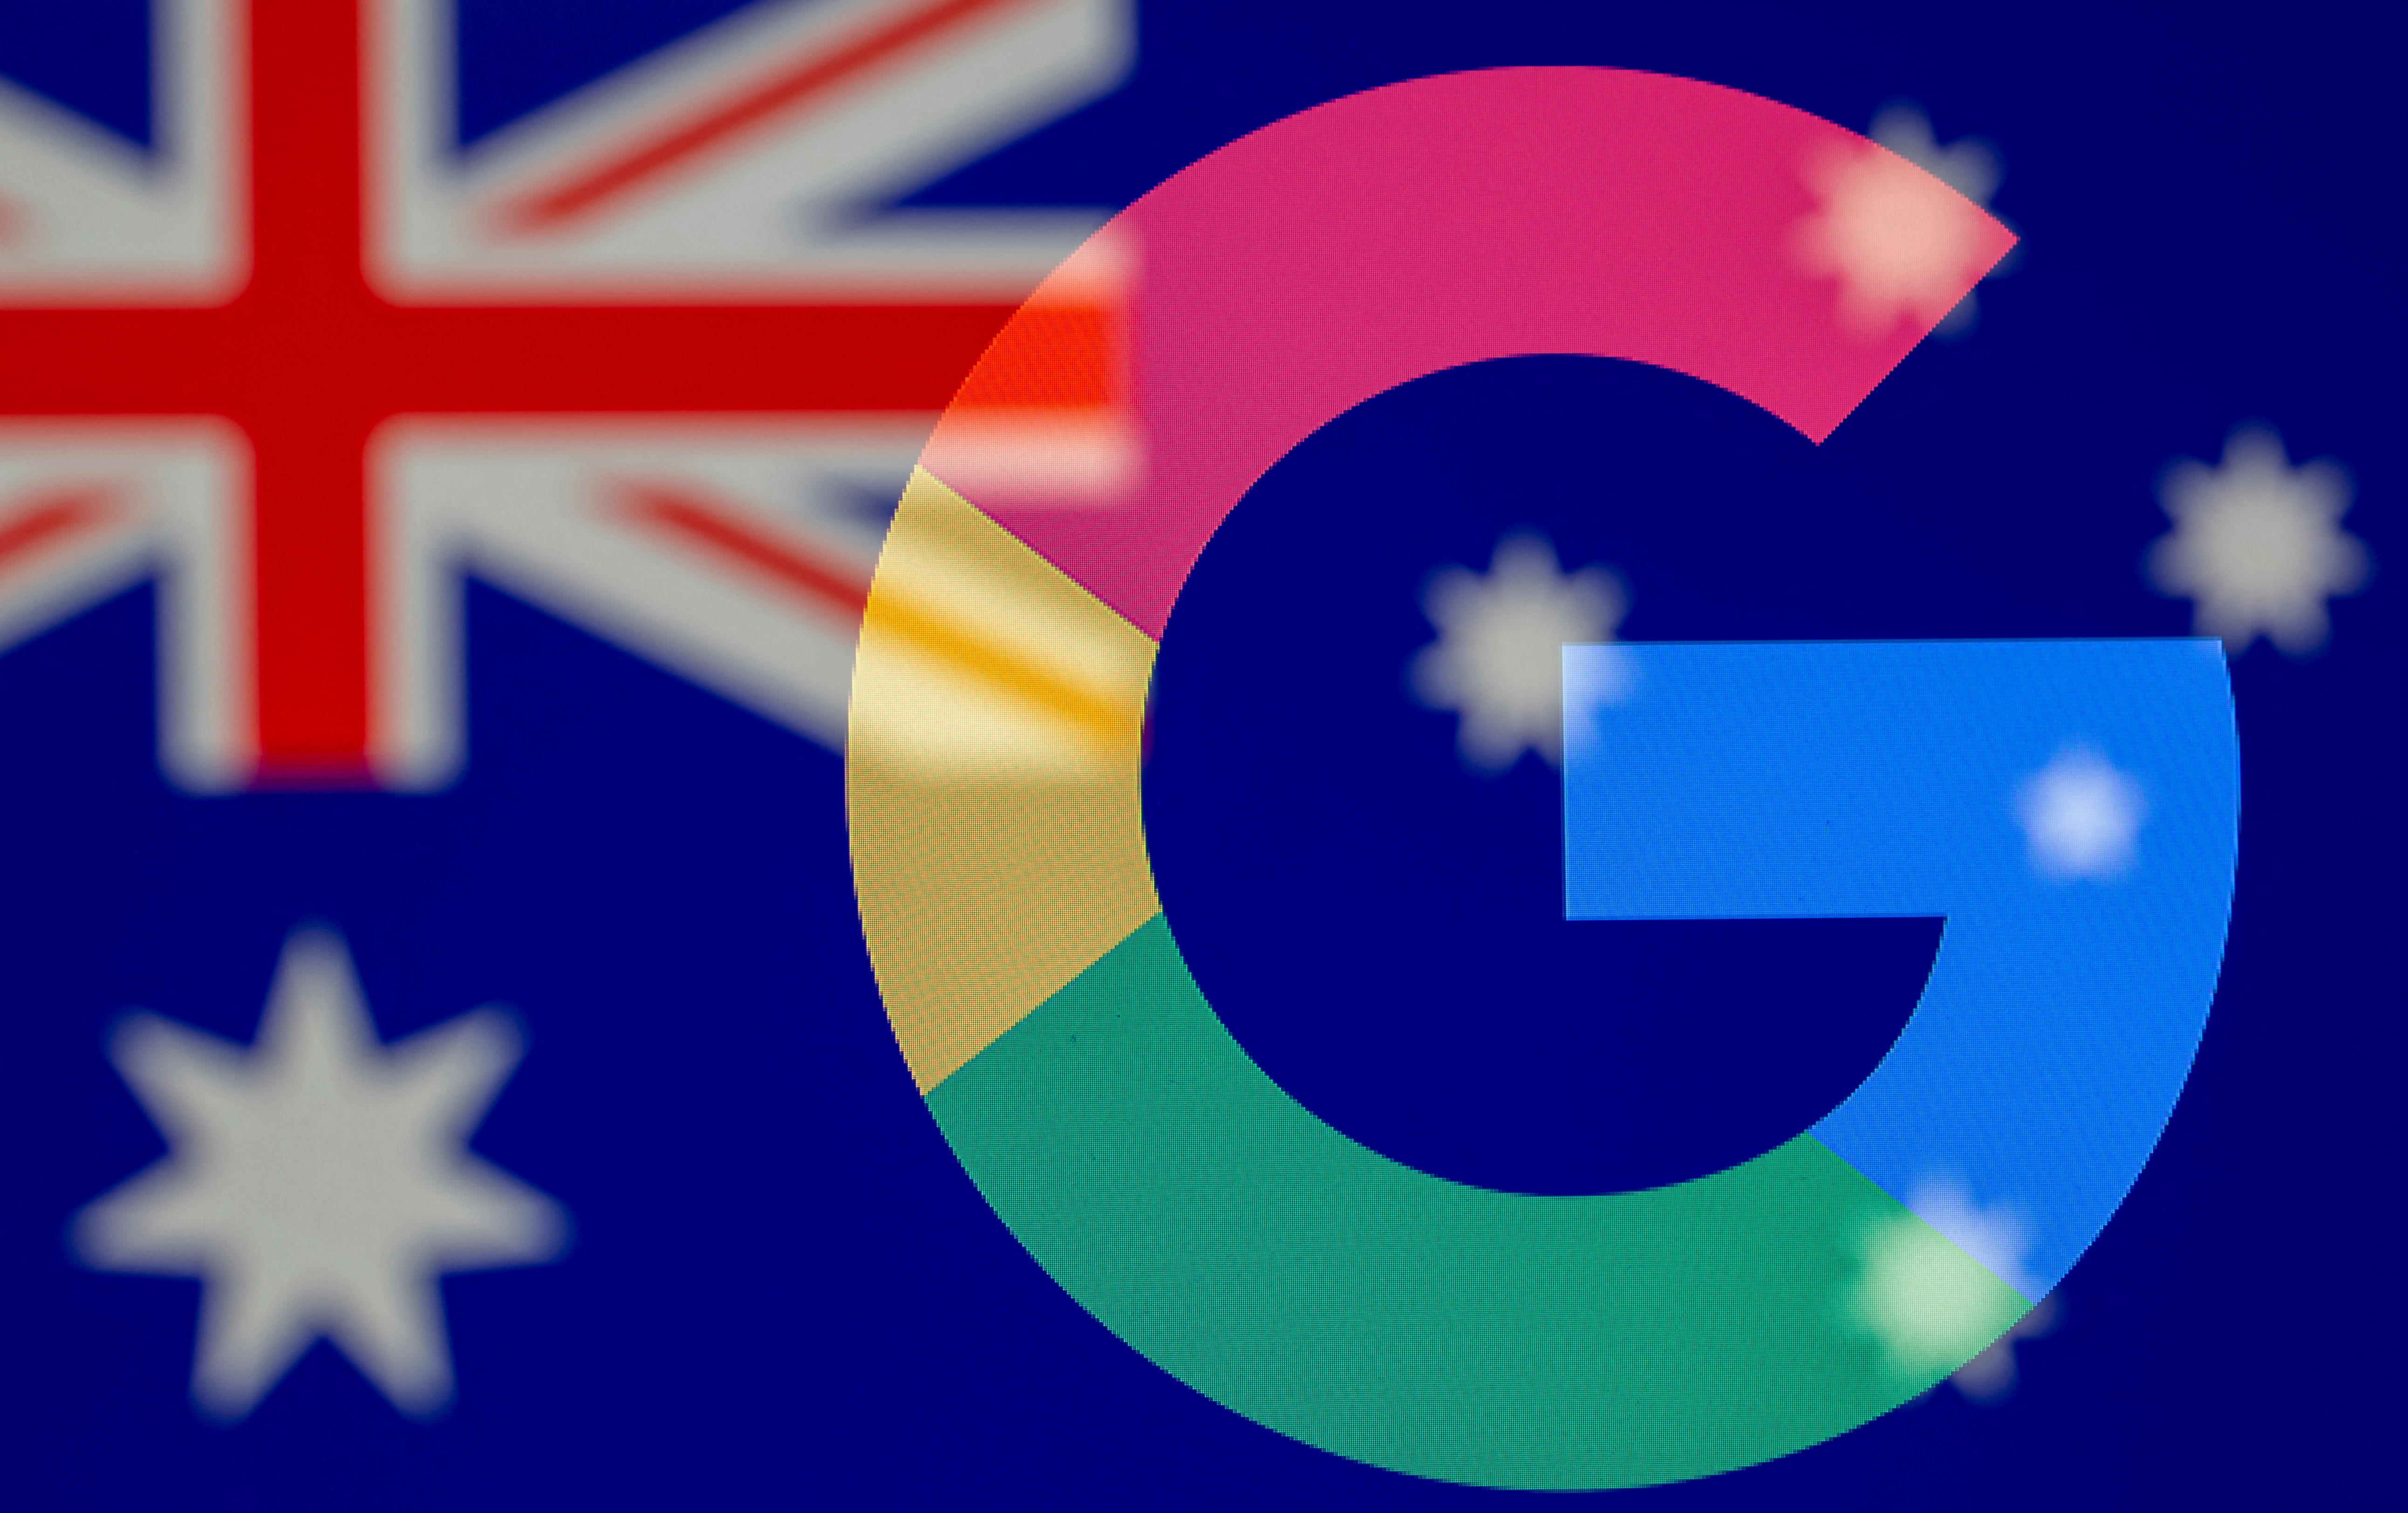 Google logo and Australian flag are displayed in this illustration